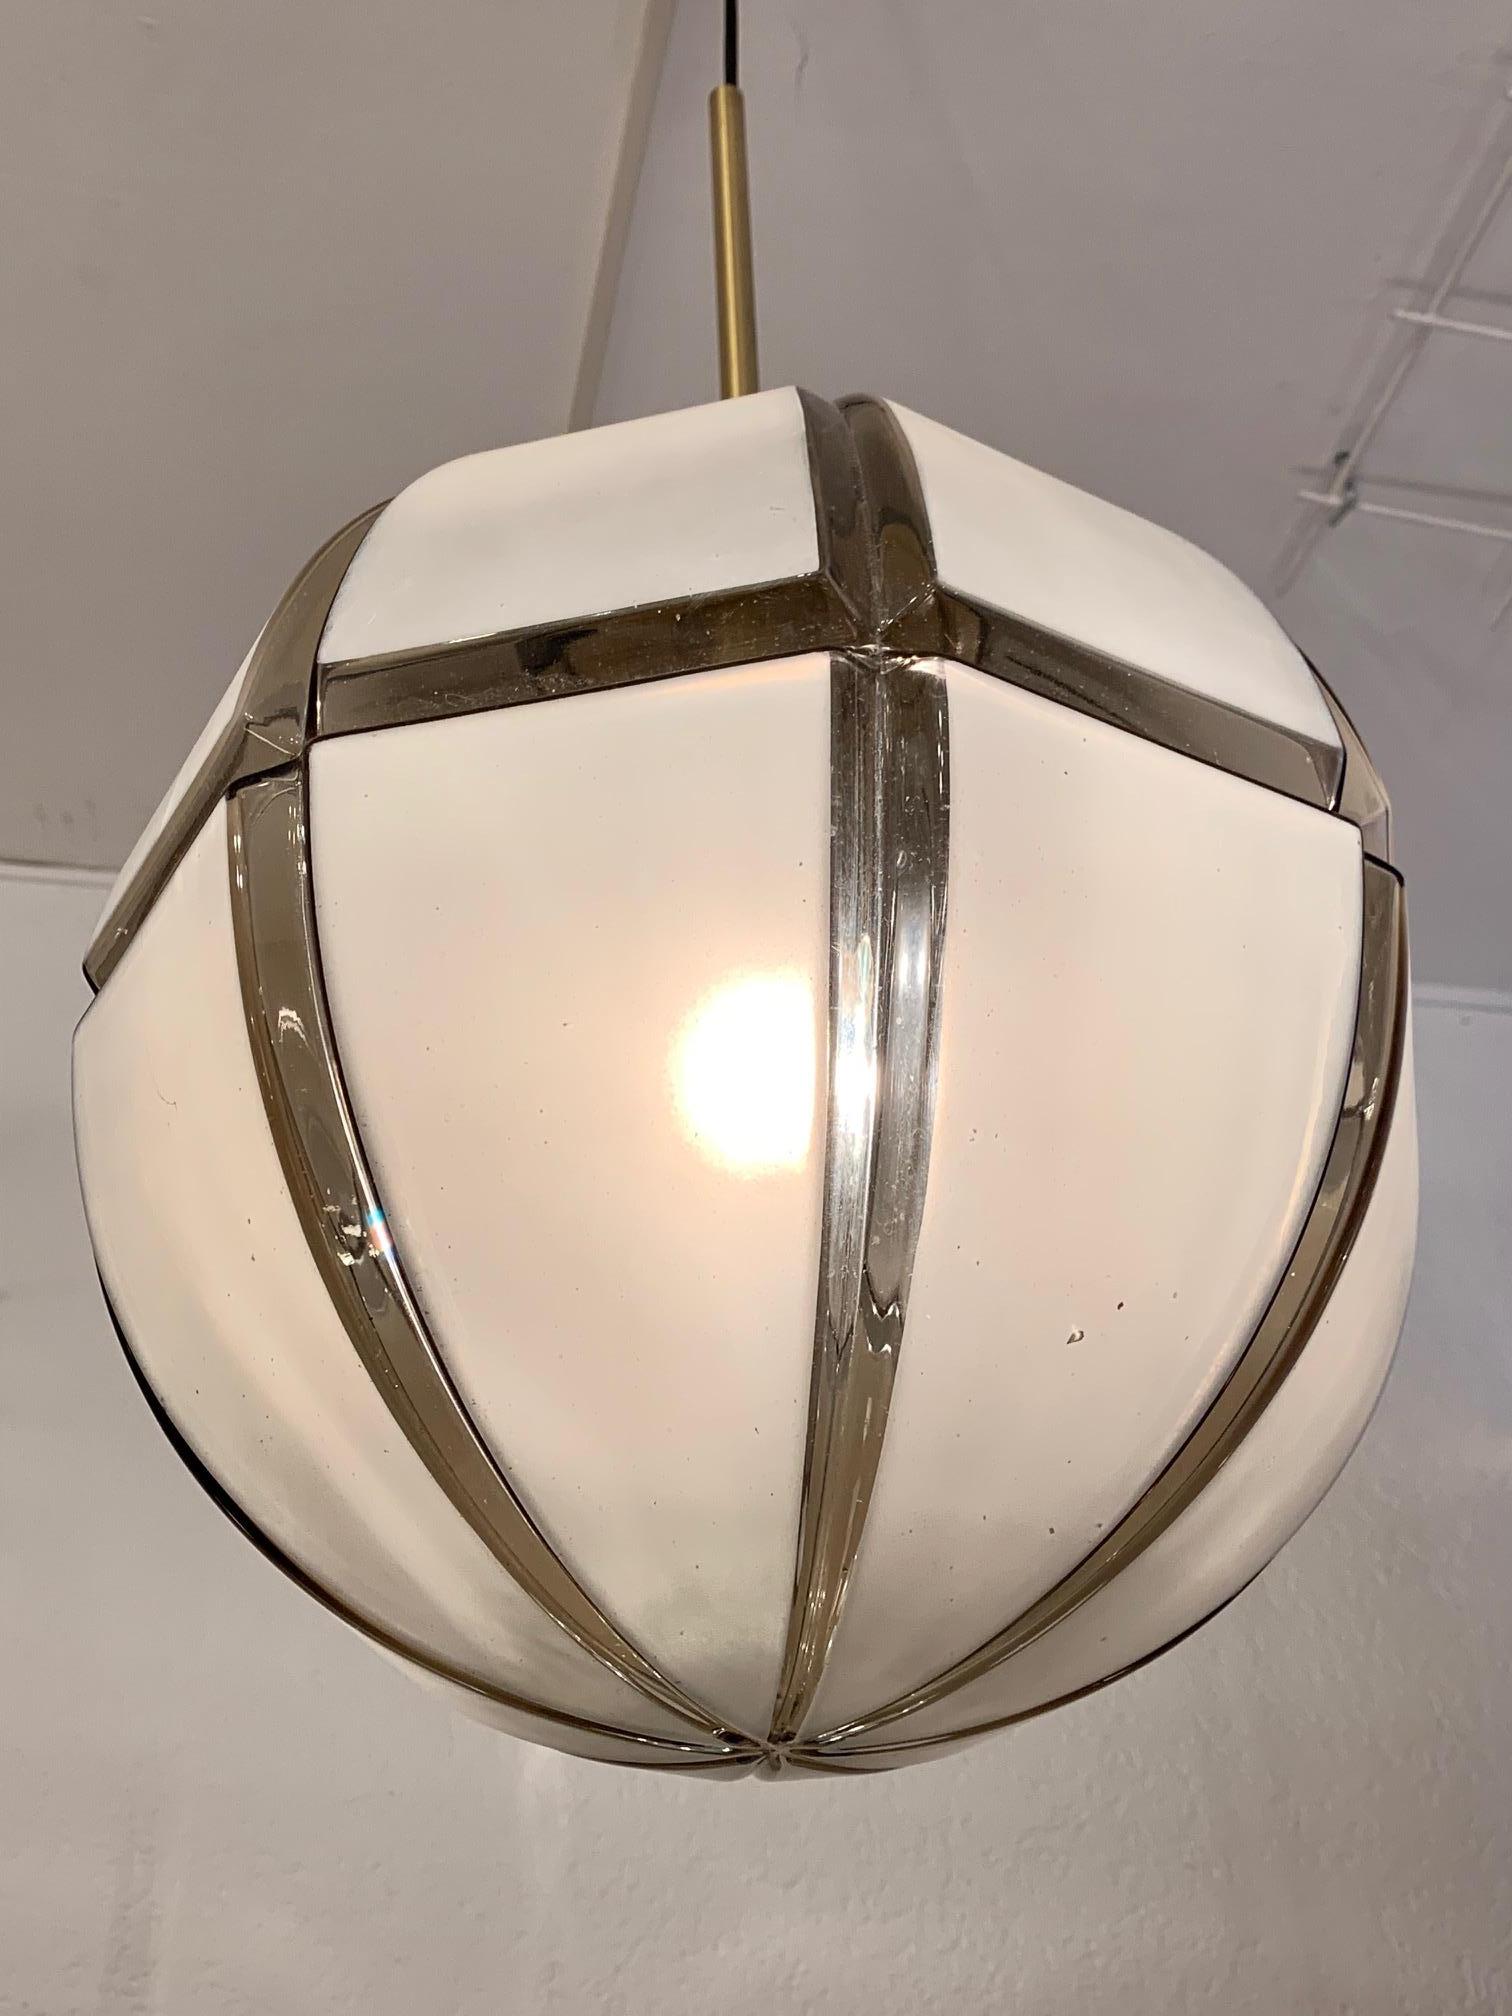 Structured smoked glass pendant lamp by Limburg, Germany ca. 1970's
Brass fixture
.